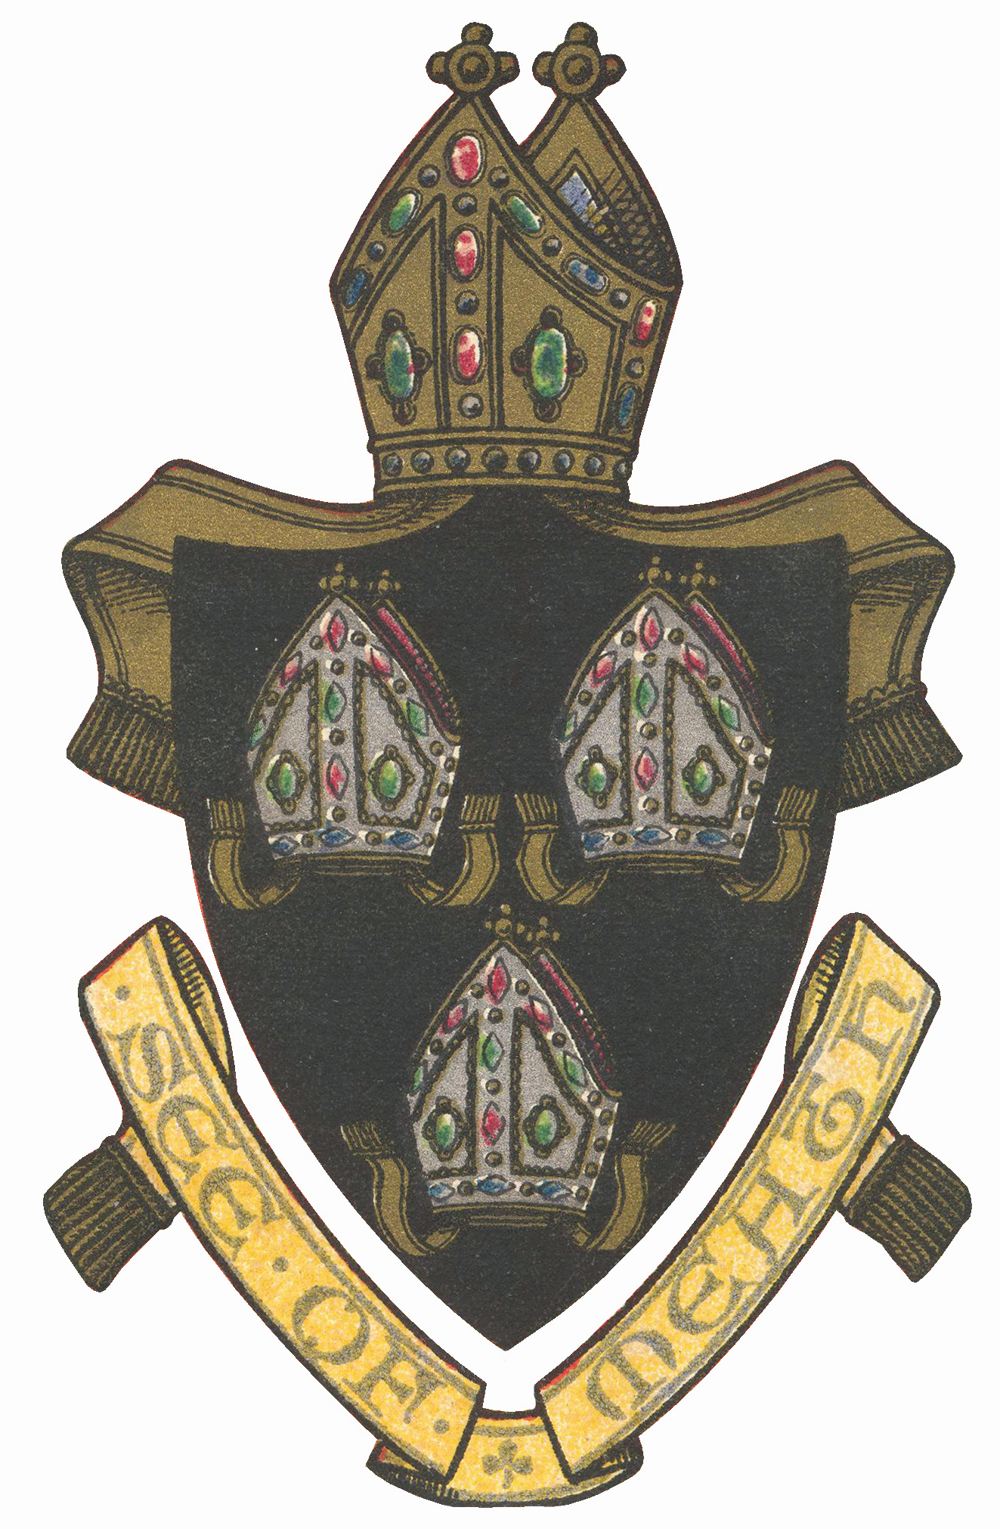 Arms of the diocese of Meath. Sable: three mitres, two and one, argent, labelled or. Image from Arms of the Episcopates of Great Britain and Ireland Emblazoned and Ornamented by Albert H. Warren, (London, 1868)